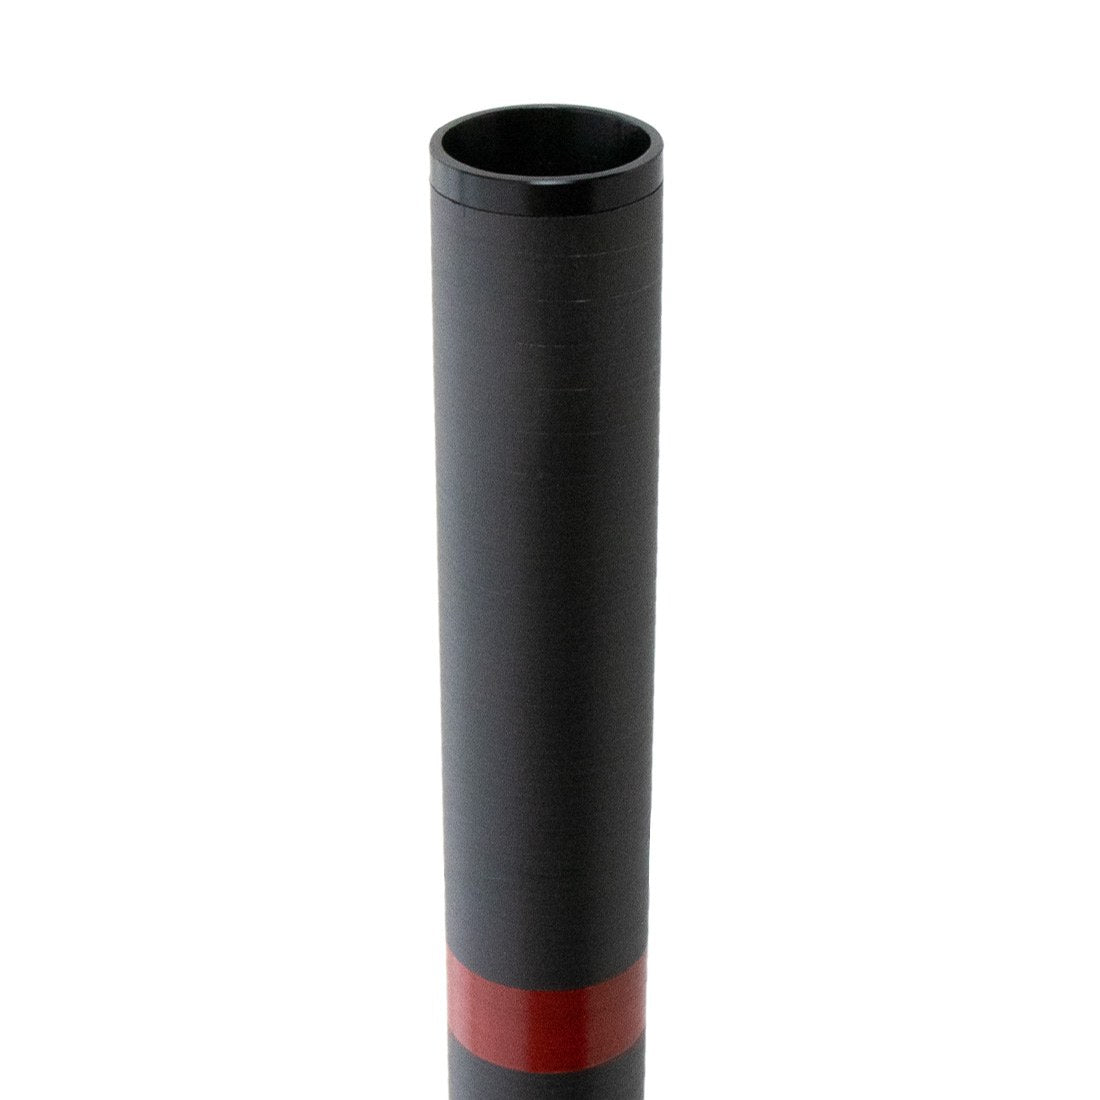 XERO Carbon Fiber Trad Pole 2.0 Replacement Section Bottom View